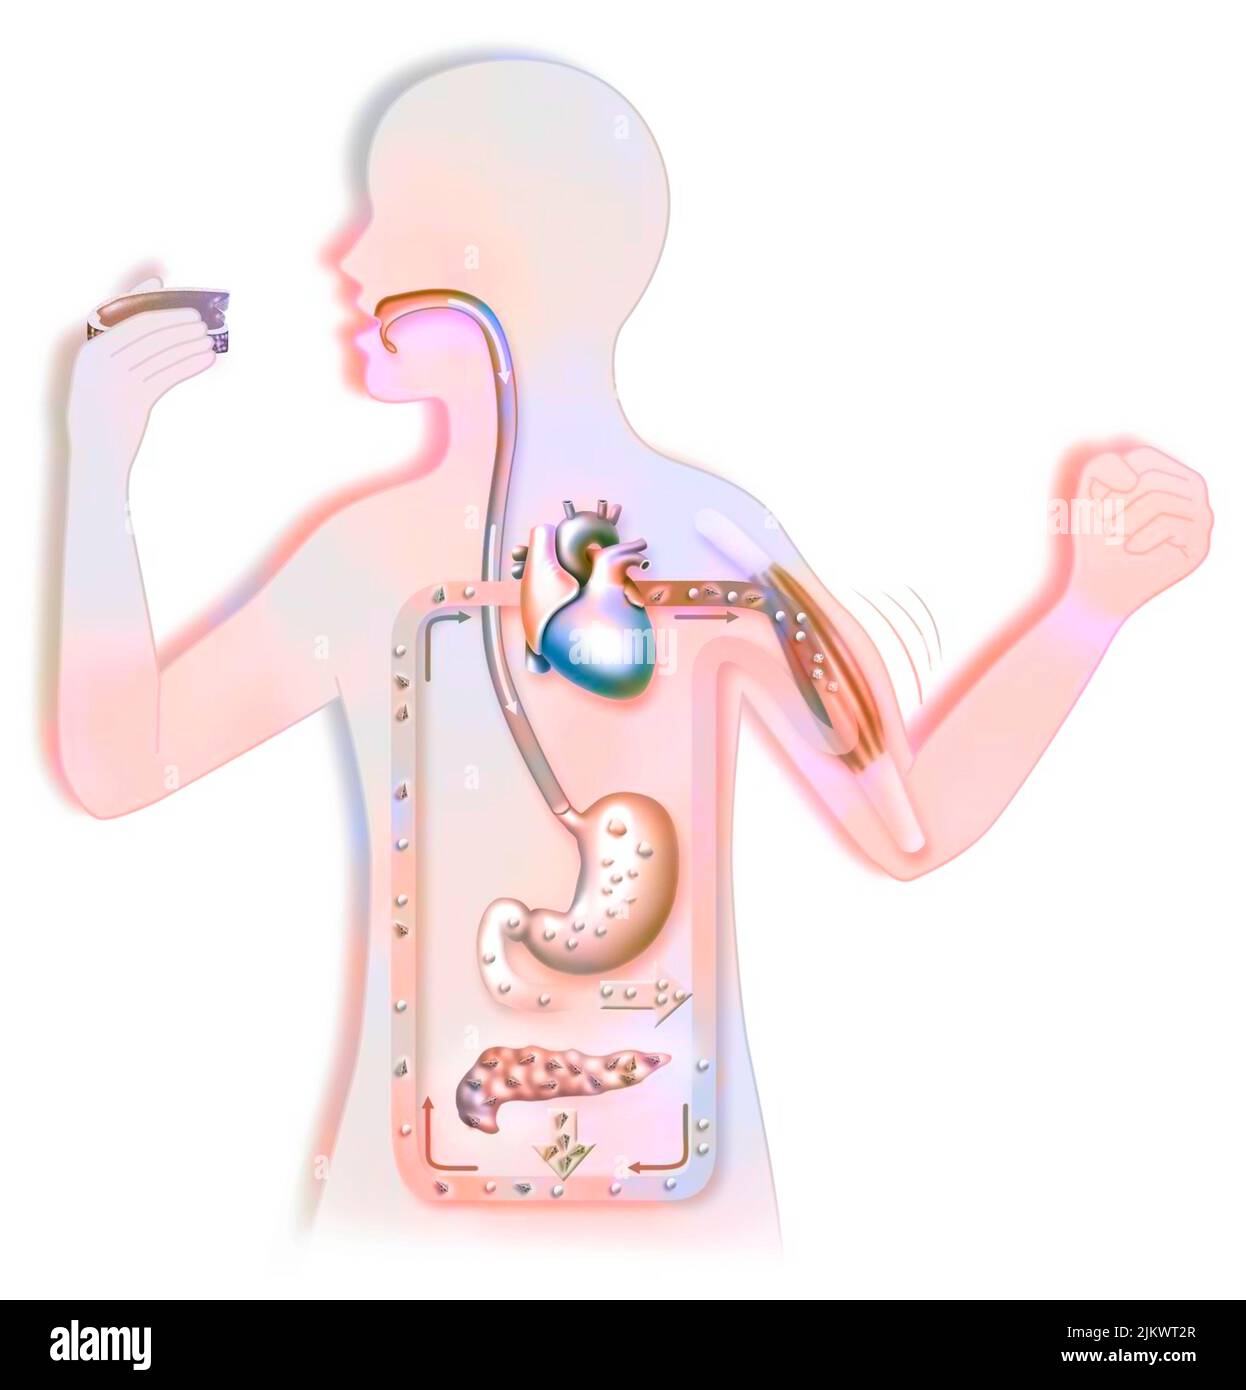 Diagram of the sugar cycle in a child's silhouette. Stock Photo